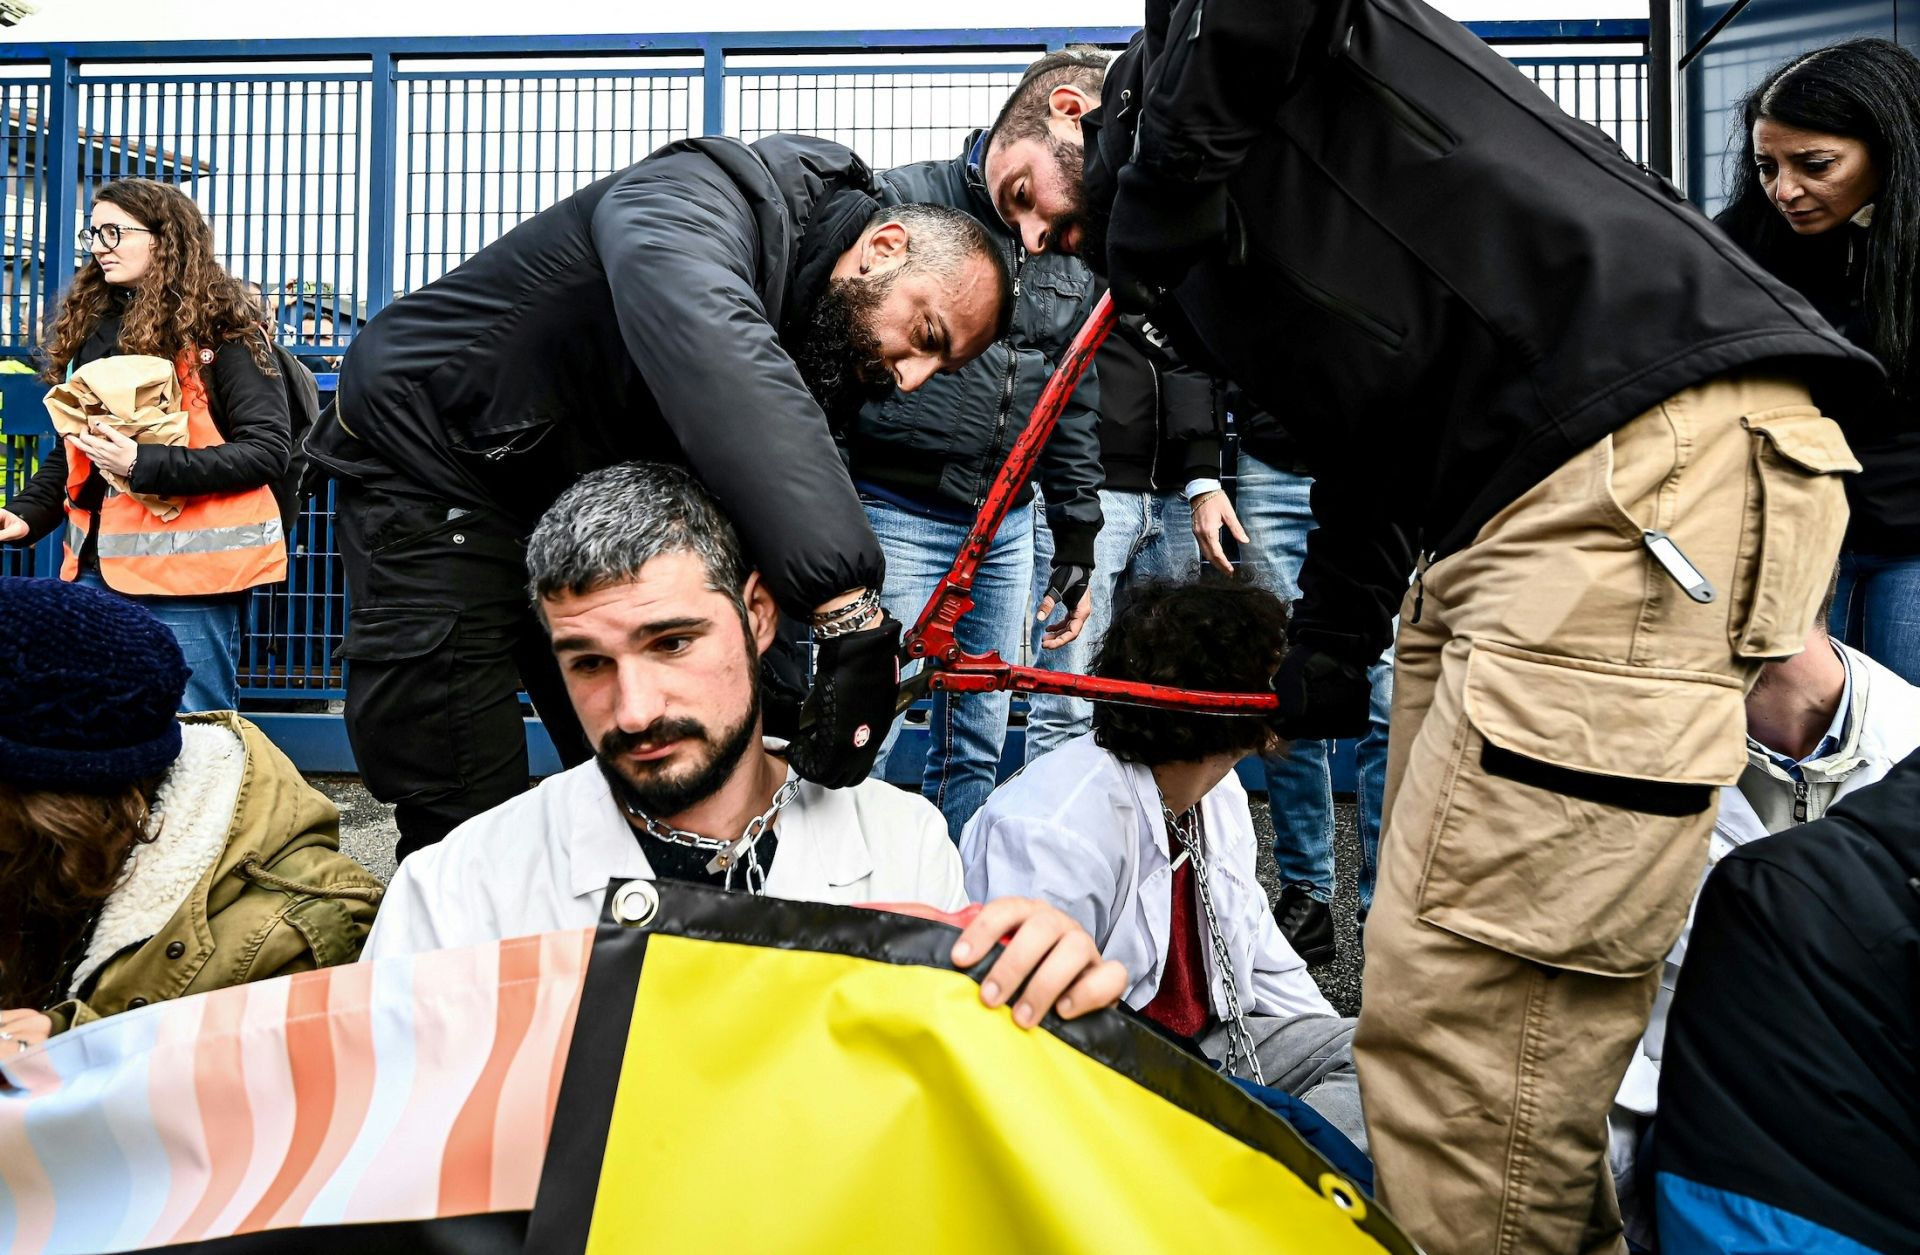 Police officers remove a chain Nov. 10, 2022, from the neck of an activist as climate activists block the entrance of the Milano Linate Prime fixed-base operator airport facility in Milan.